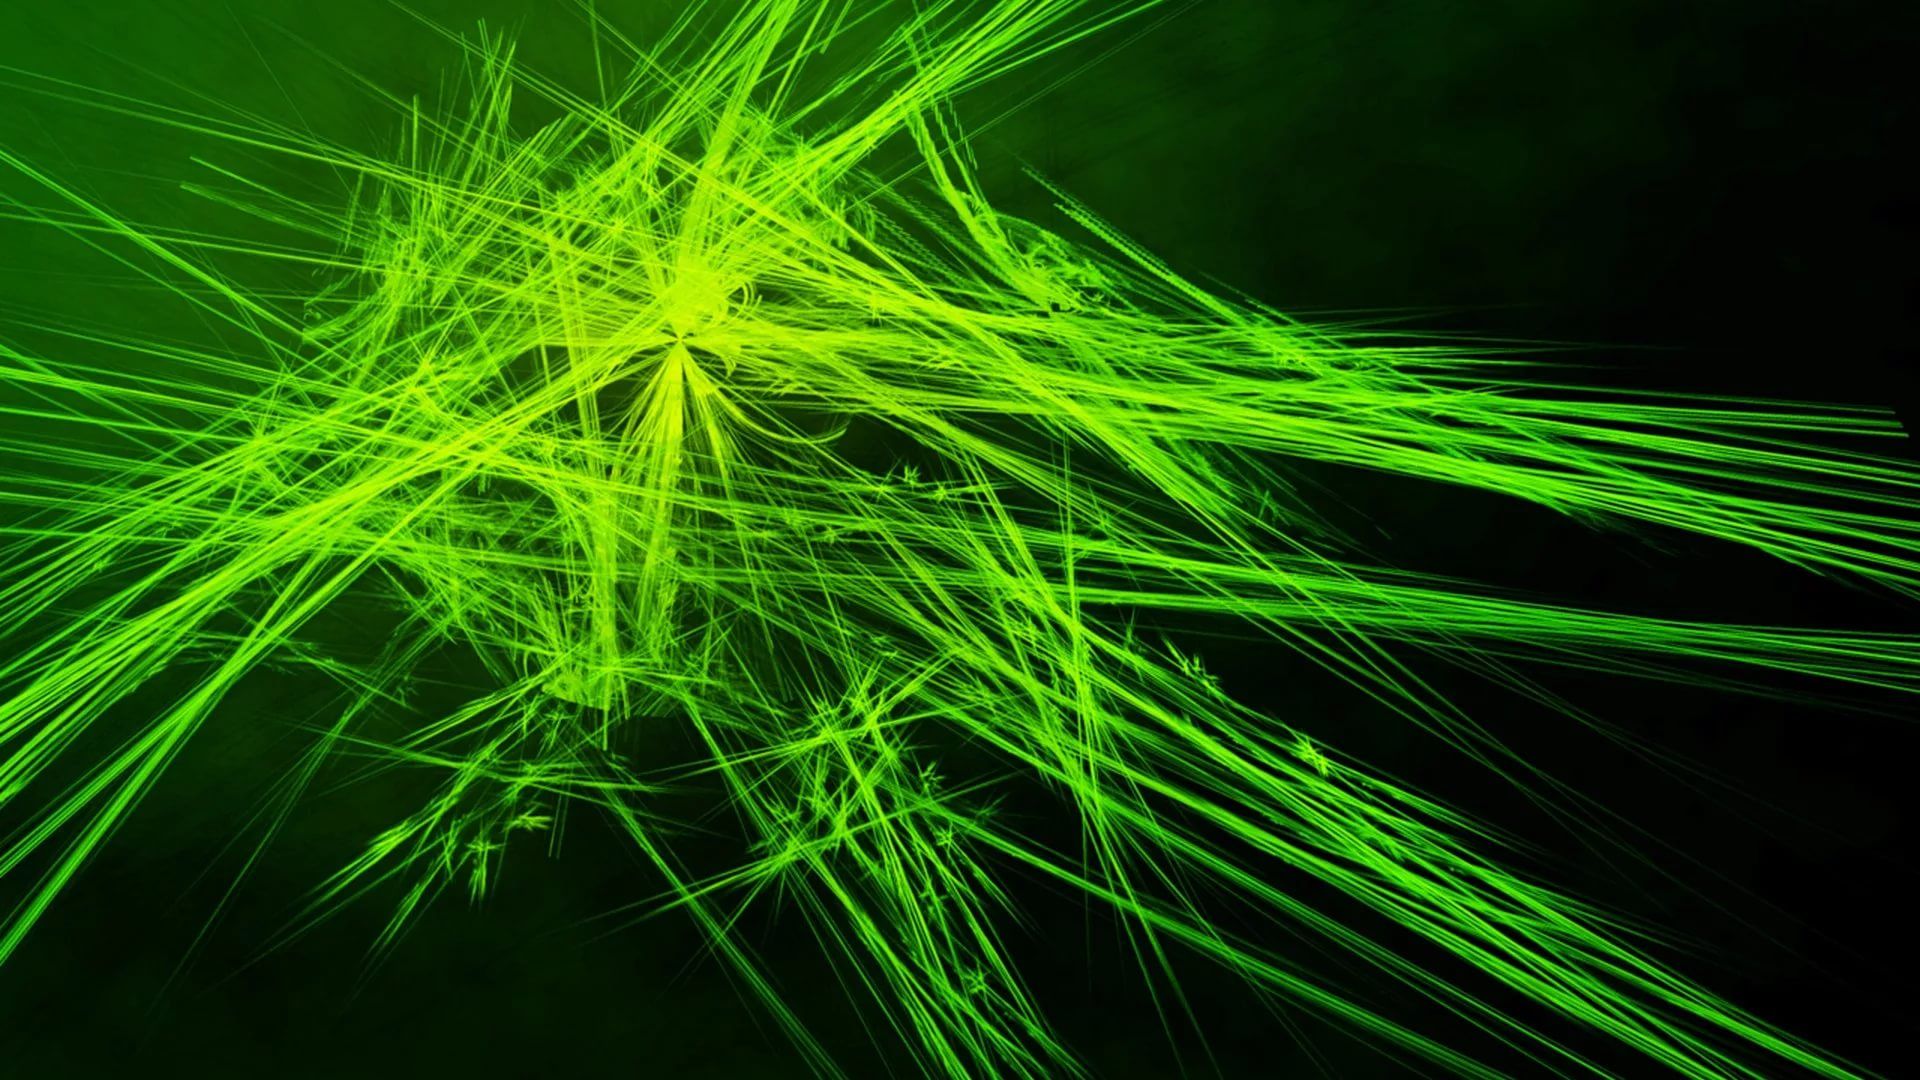 Neon Green download free wallpapers for pc in hd